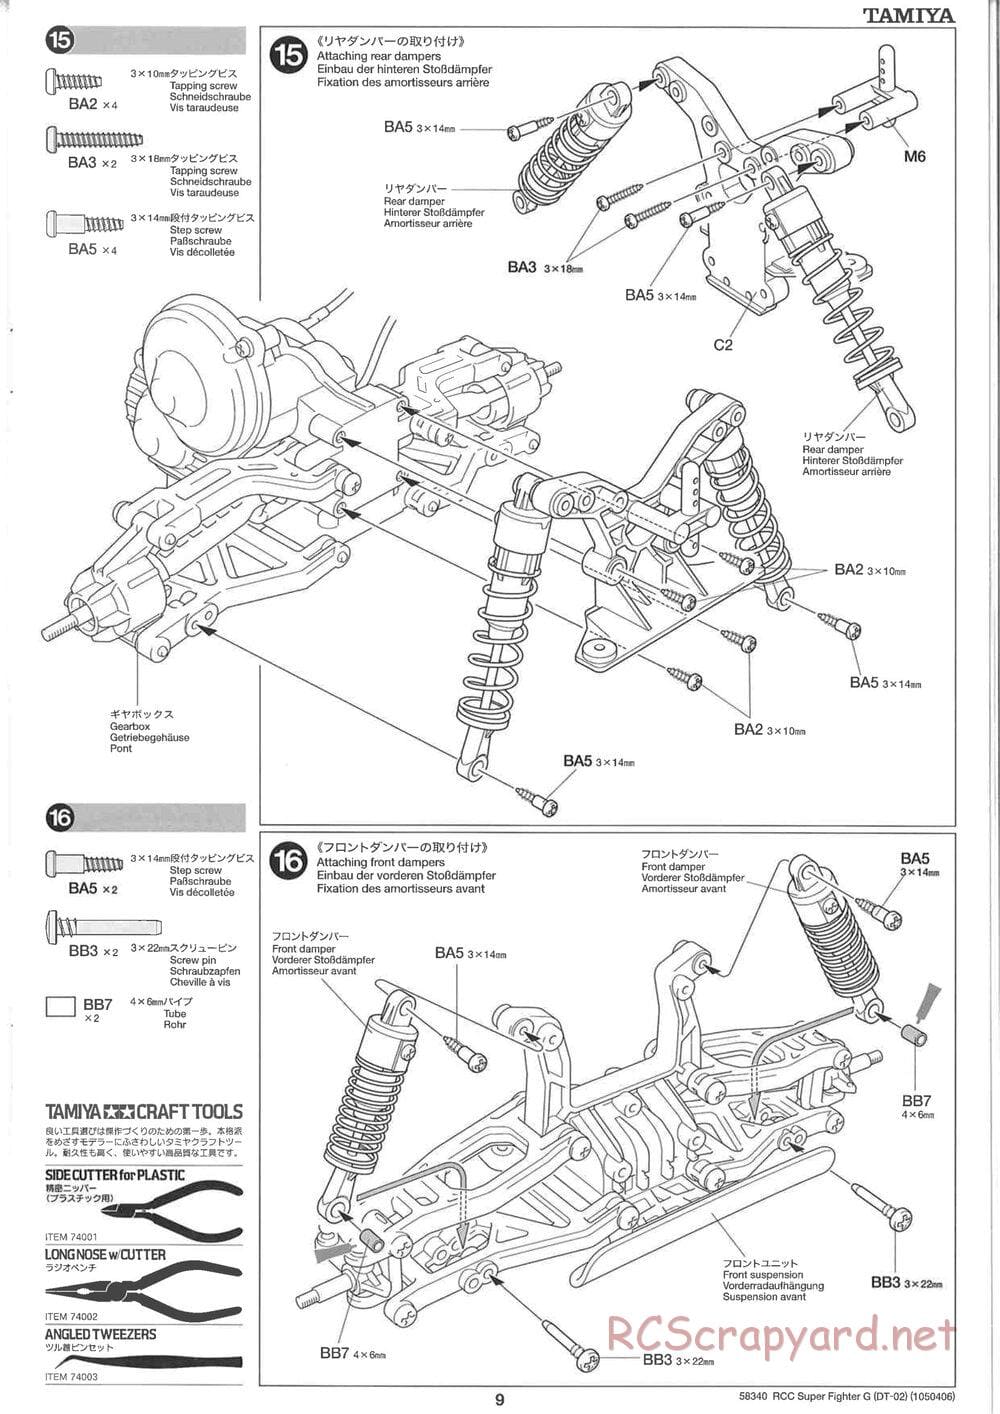 Tamiya - Super Fighter G Chassis - Manual - Page 9